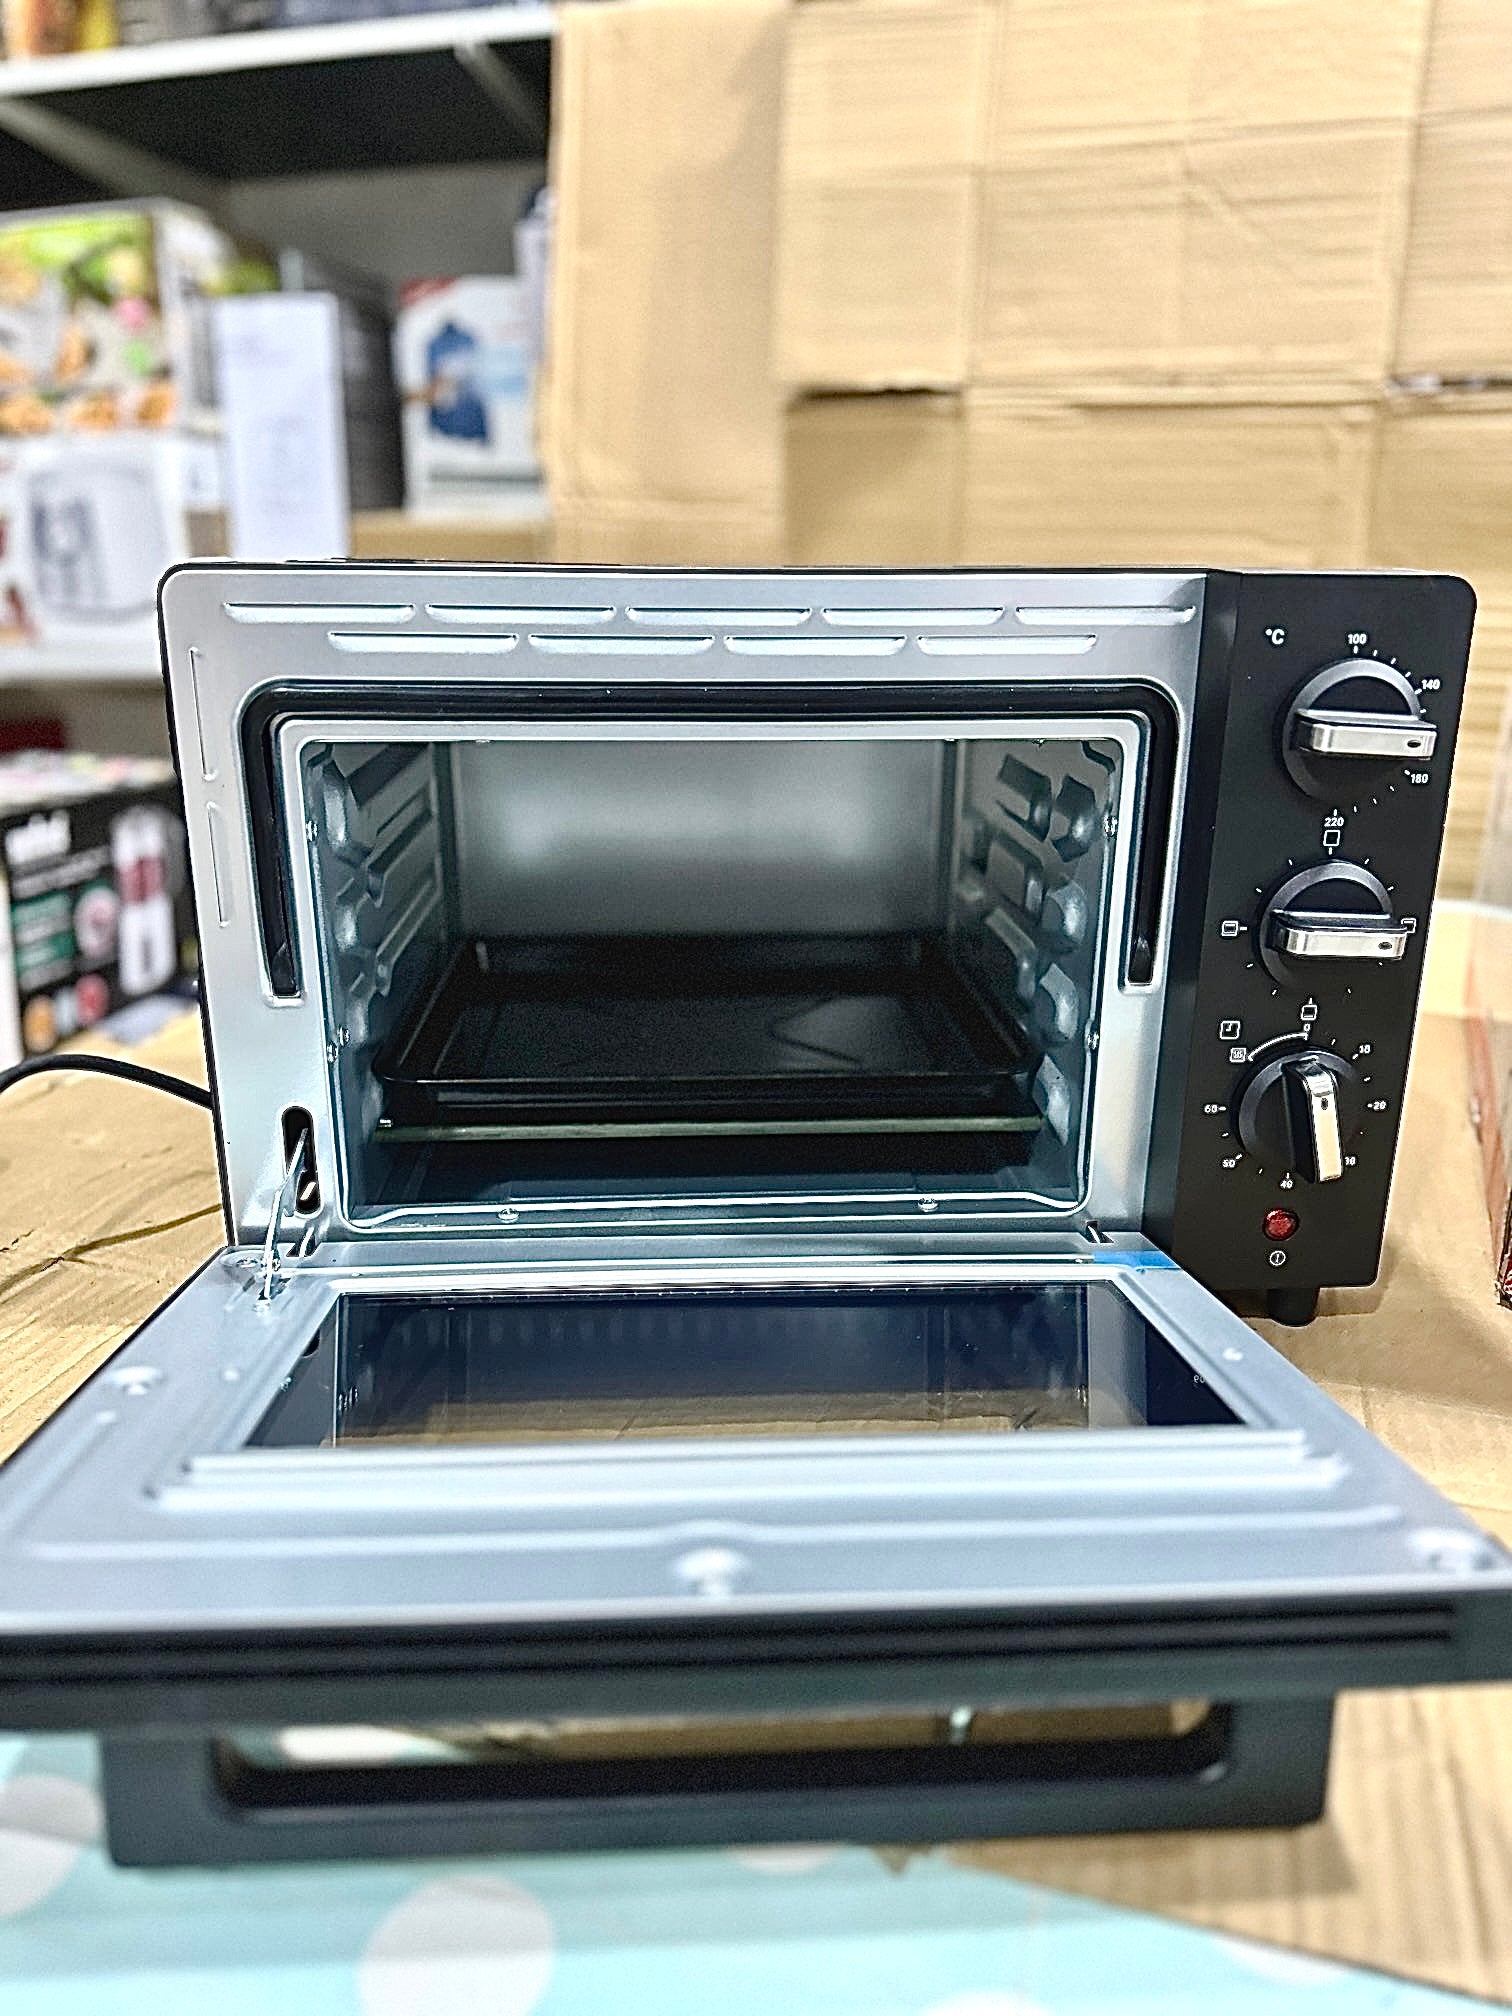 Netherlands lot imported 18 litre Electric oven